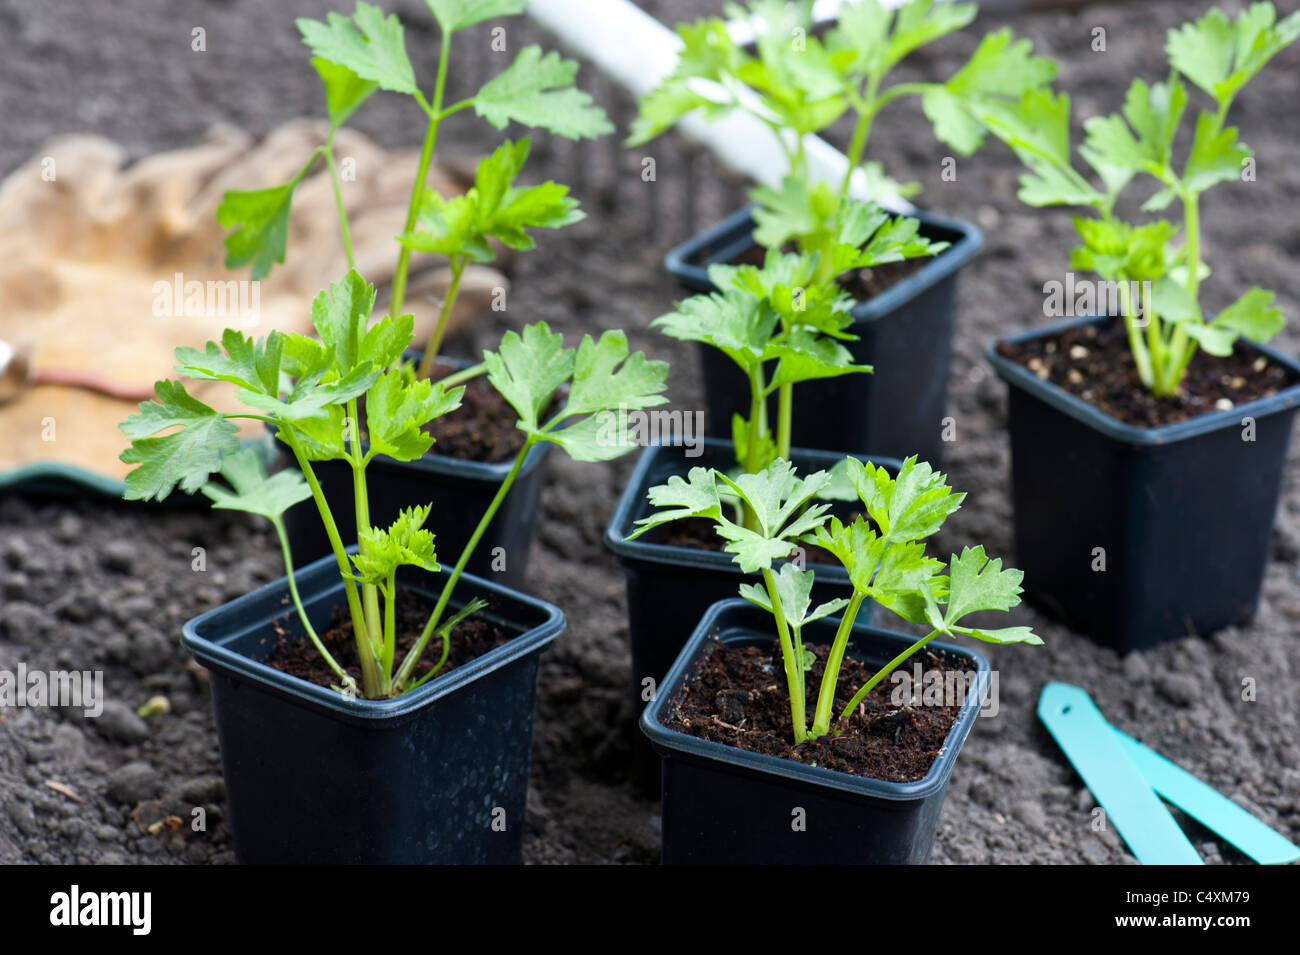 Young Celeriac Plants In Pots, Ready For Planting Out In The Vegetable Garden. Stock Photo